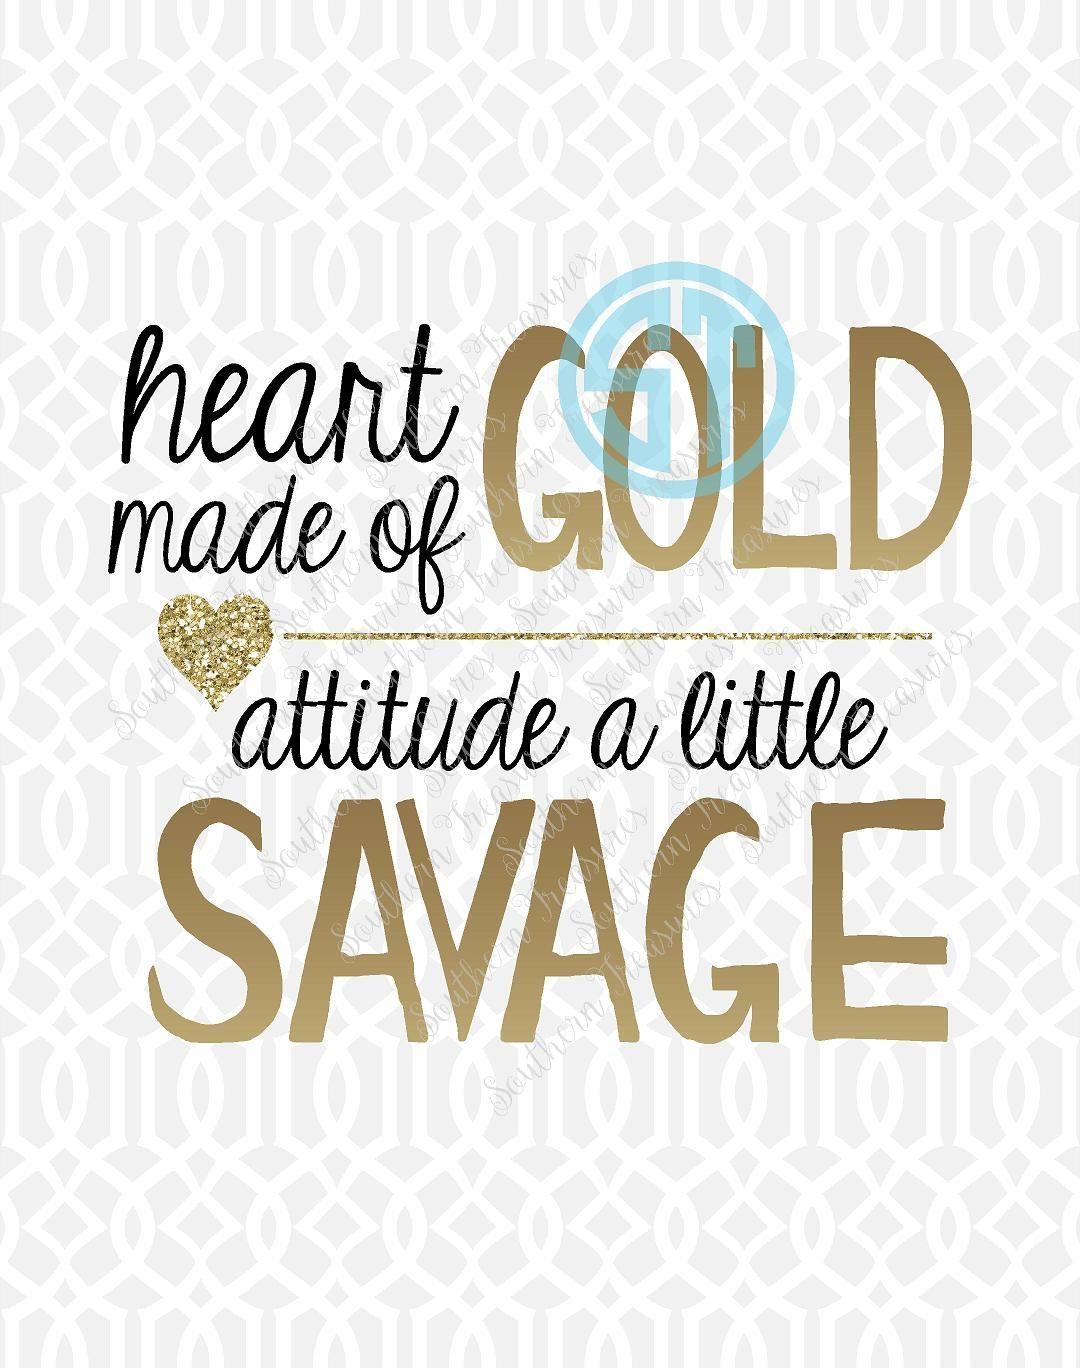 Savage Heat Logo - Heart Made of Gold Attitude a Little Savage - Southern Treasures ...